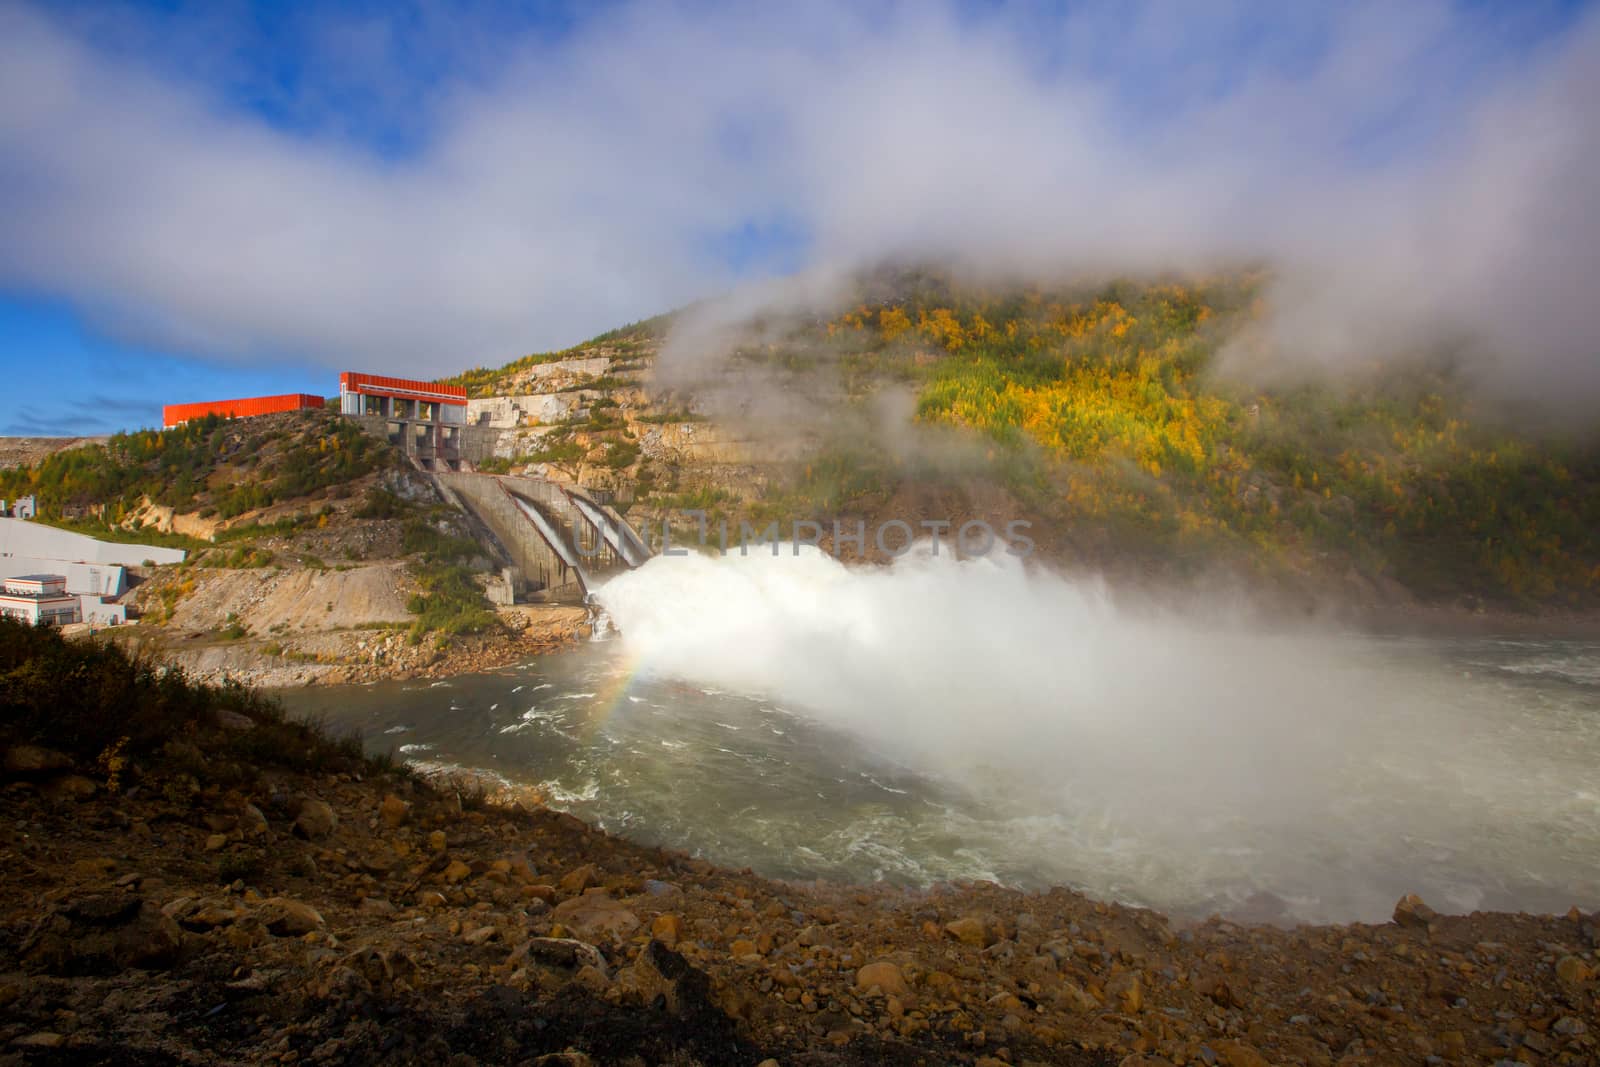 Kolyma hydroelectric power station in Magadan region, Russia. Spillway from the dam of the hydroelectric power station.